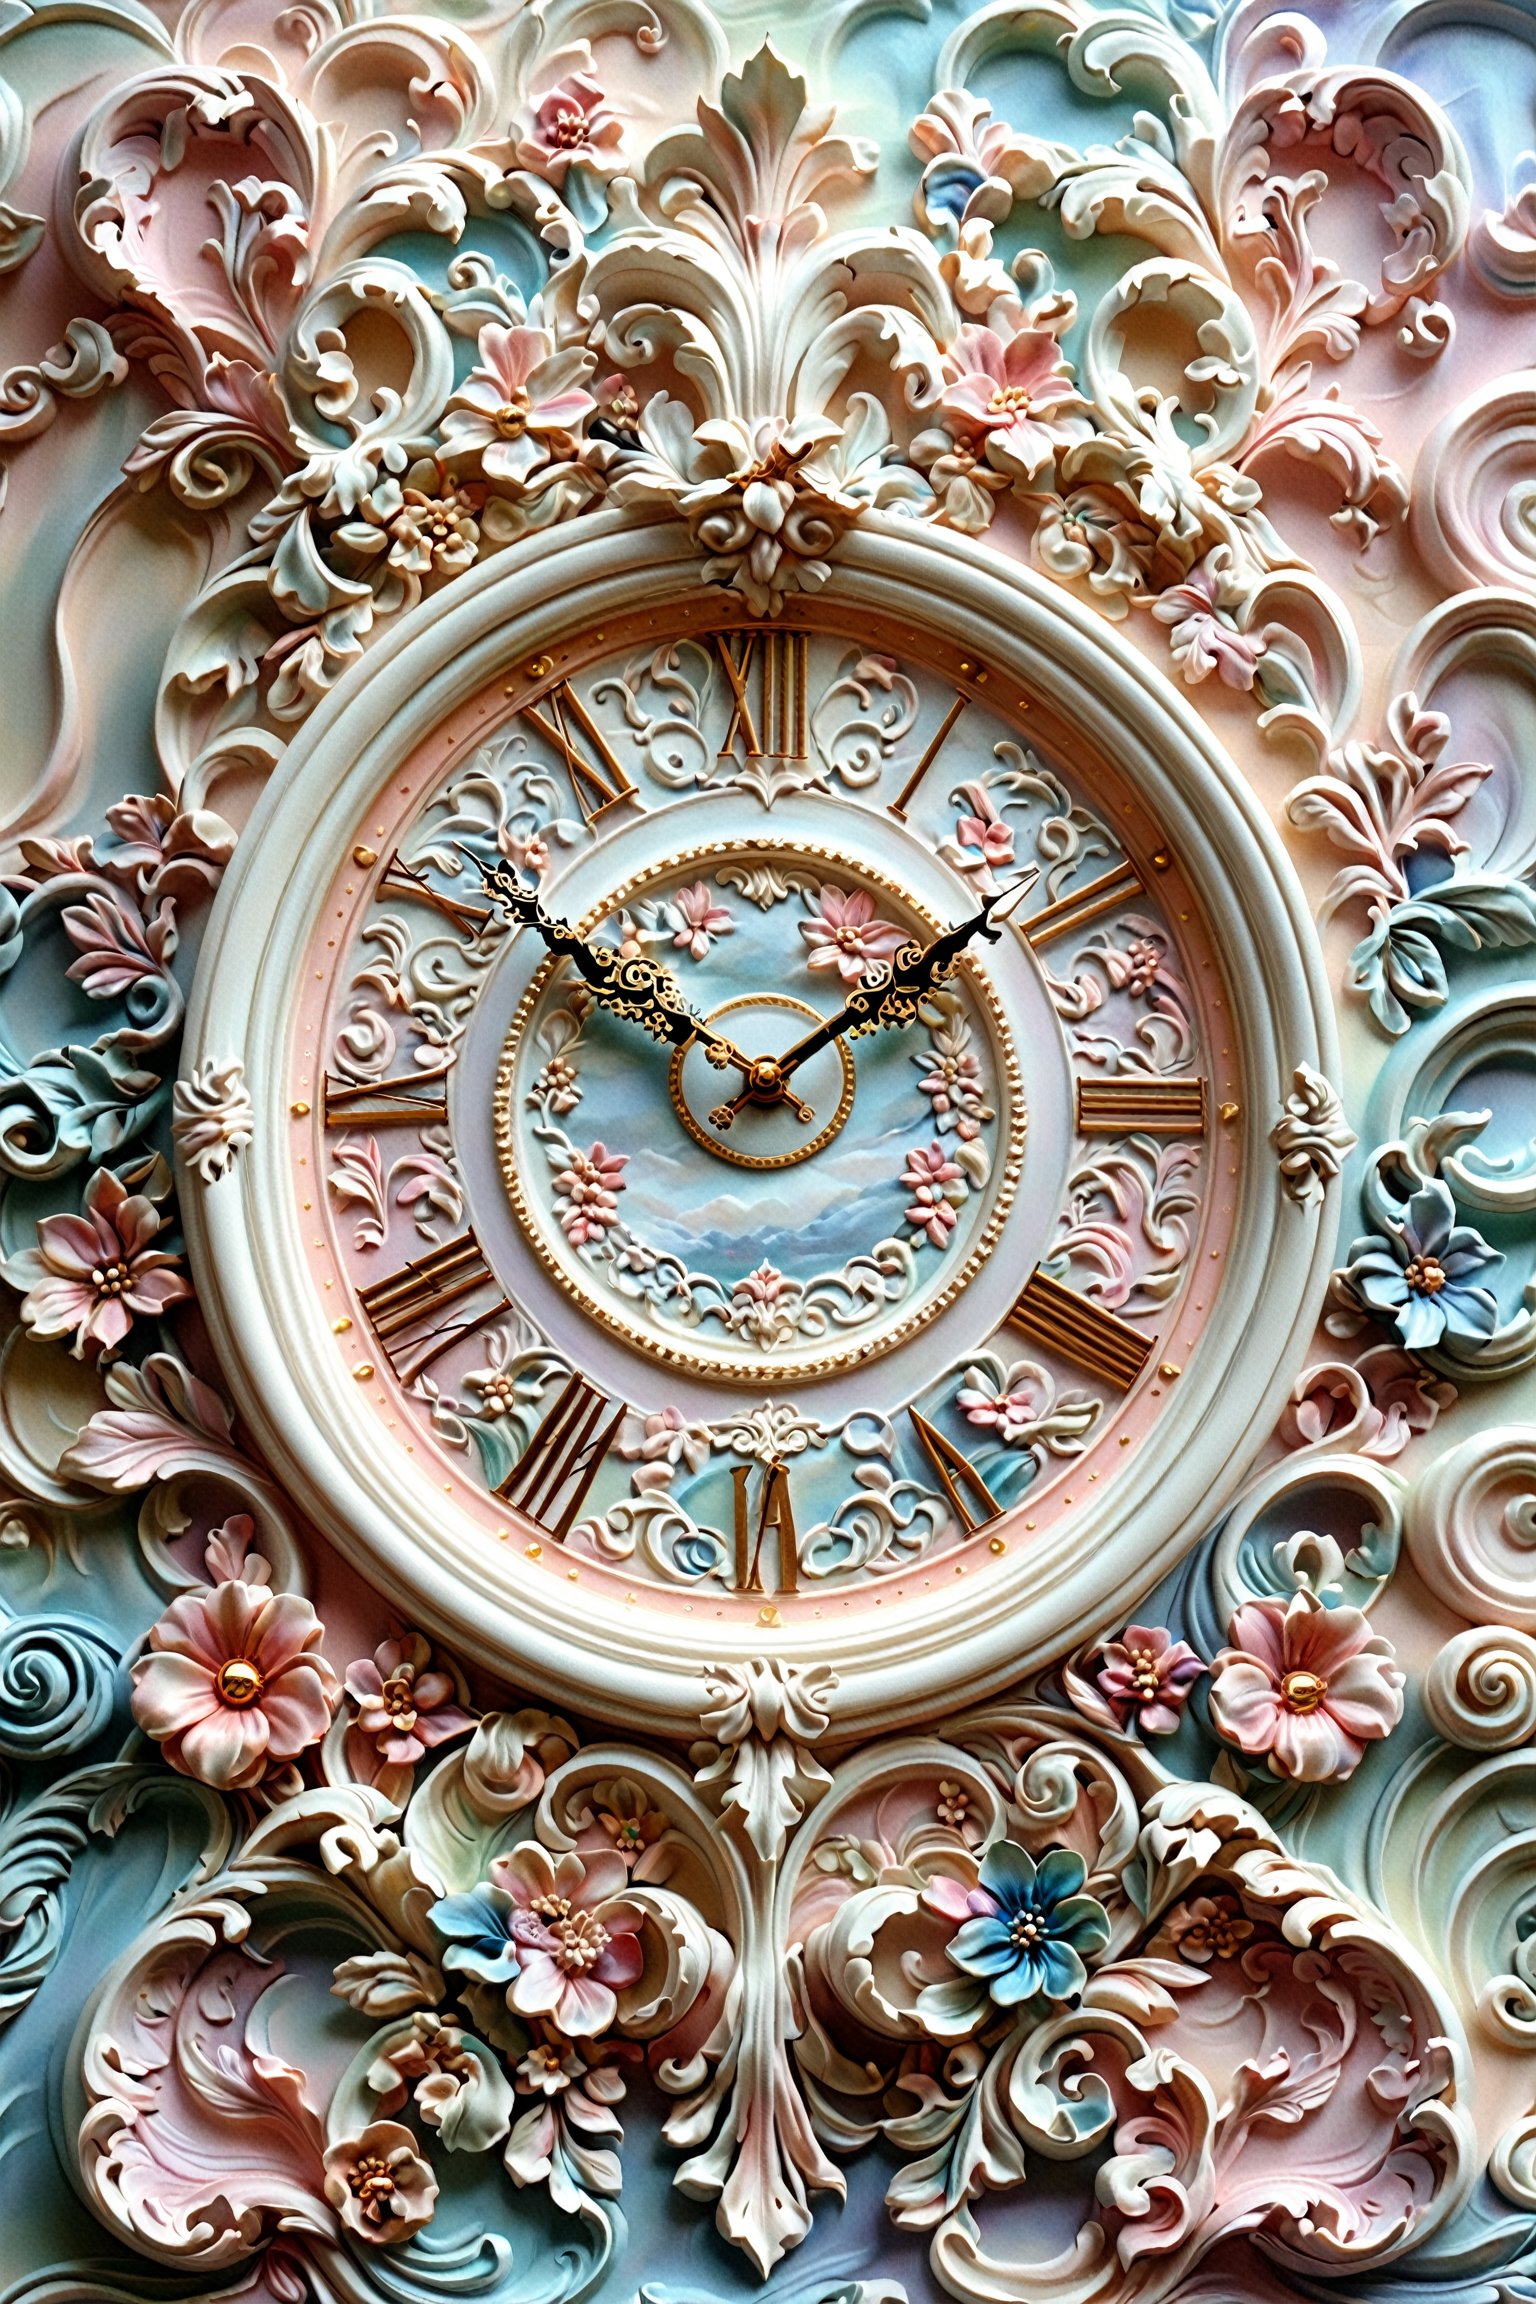 An intricately designed clock surrounded by ornate, swirling patterns and decorative elements. The clock face is adorned with a serene landscape, and the hands of the clock are delicately crafted. The background is a blend of pastel colors, with floral motifs and other decorative details that enhance the overall aesthetic of the piece.